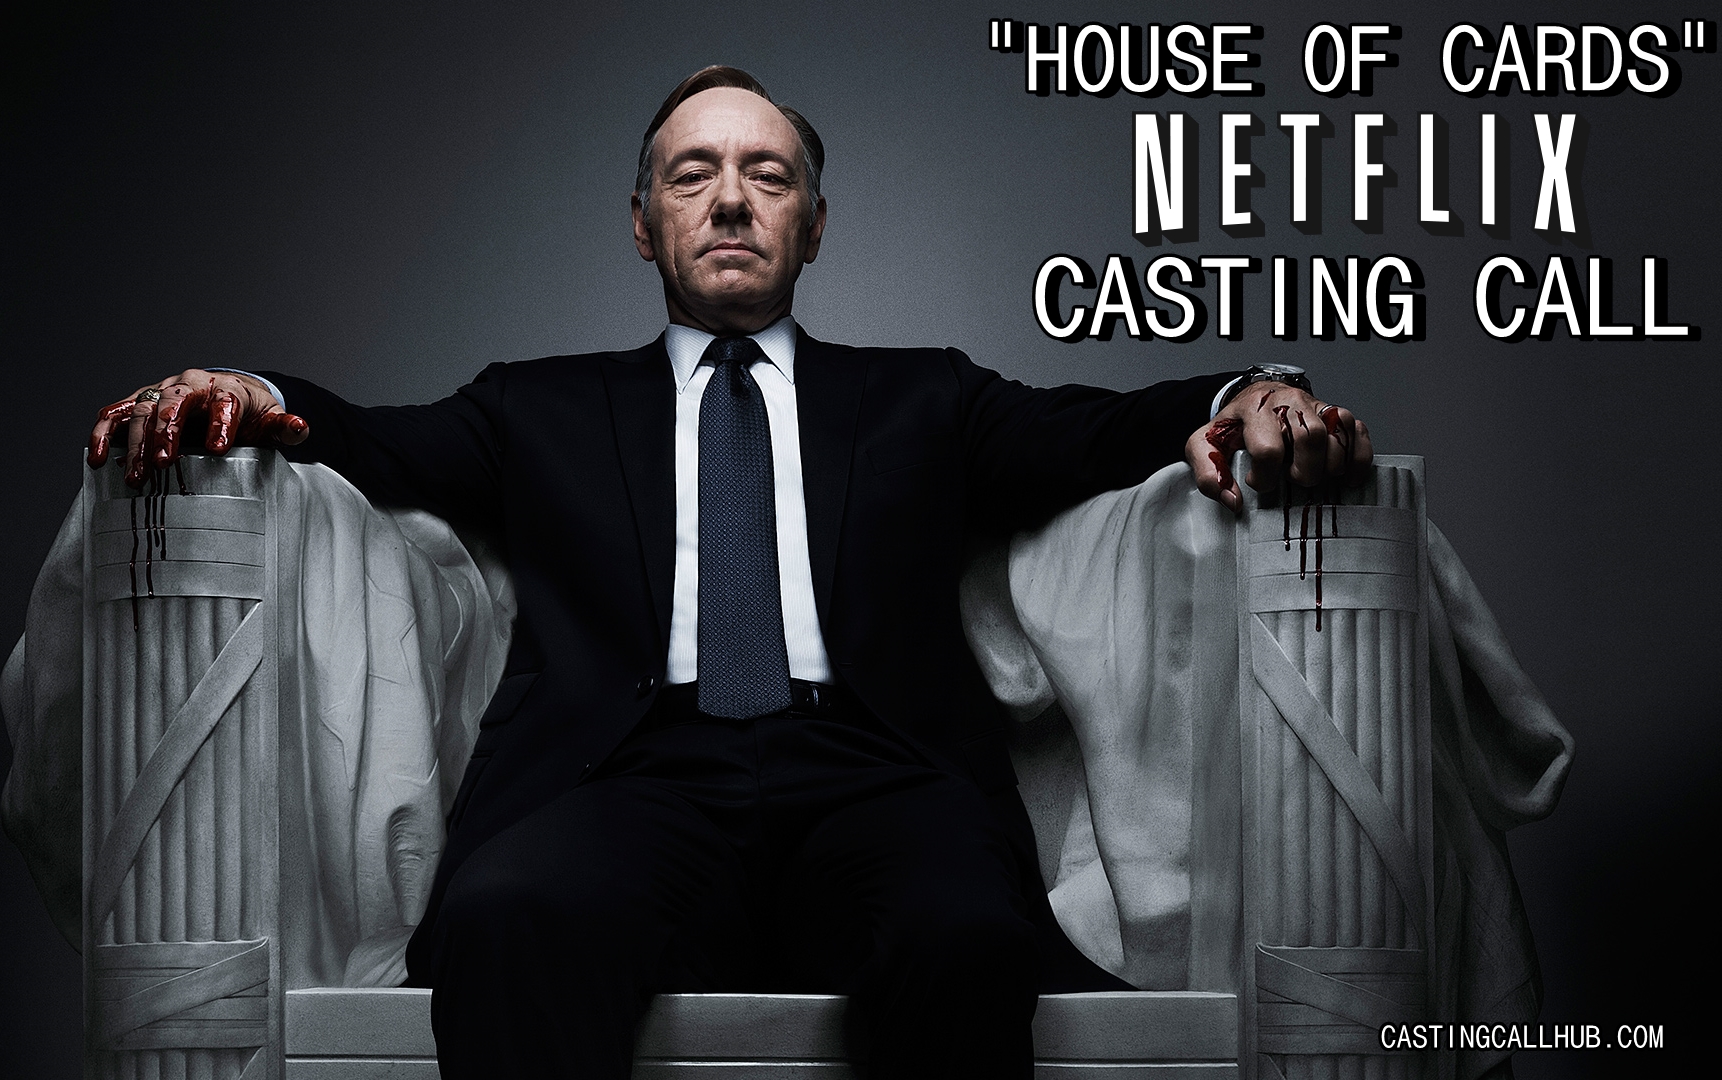 Season 5 of House of Cards – Netflix Auditions for 2017